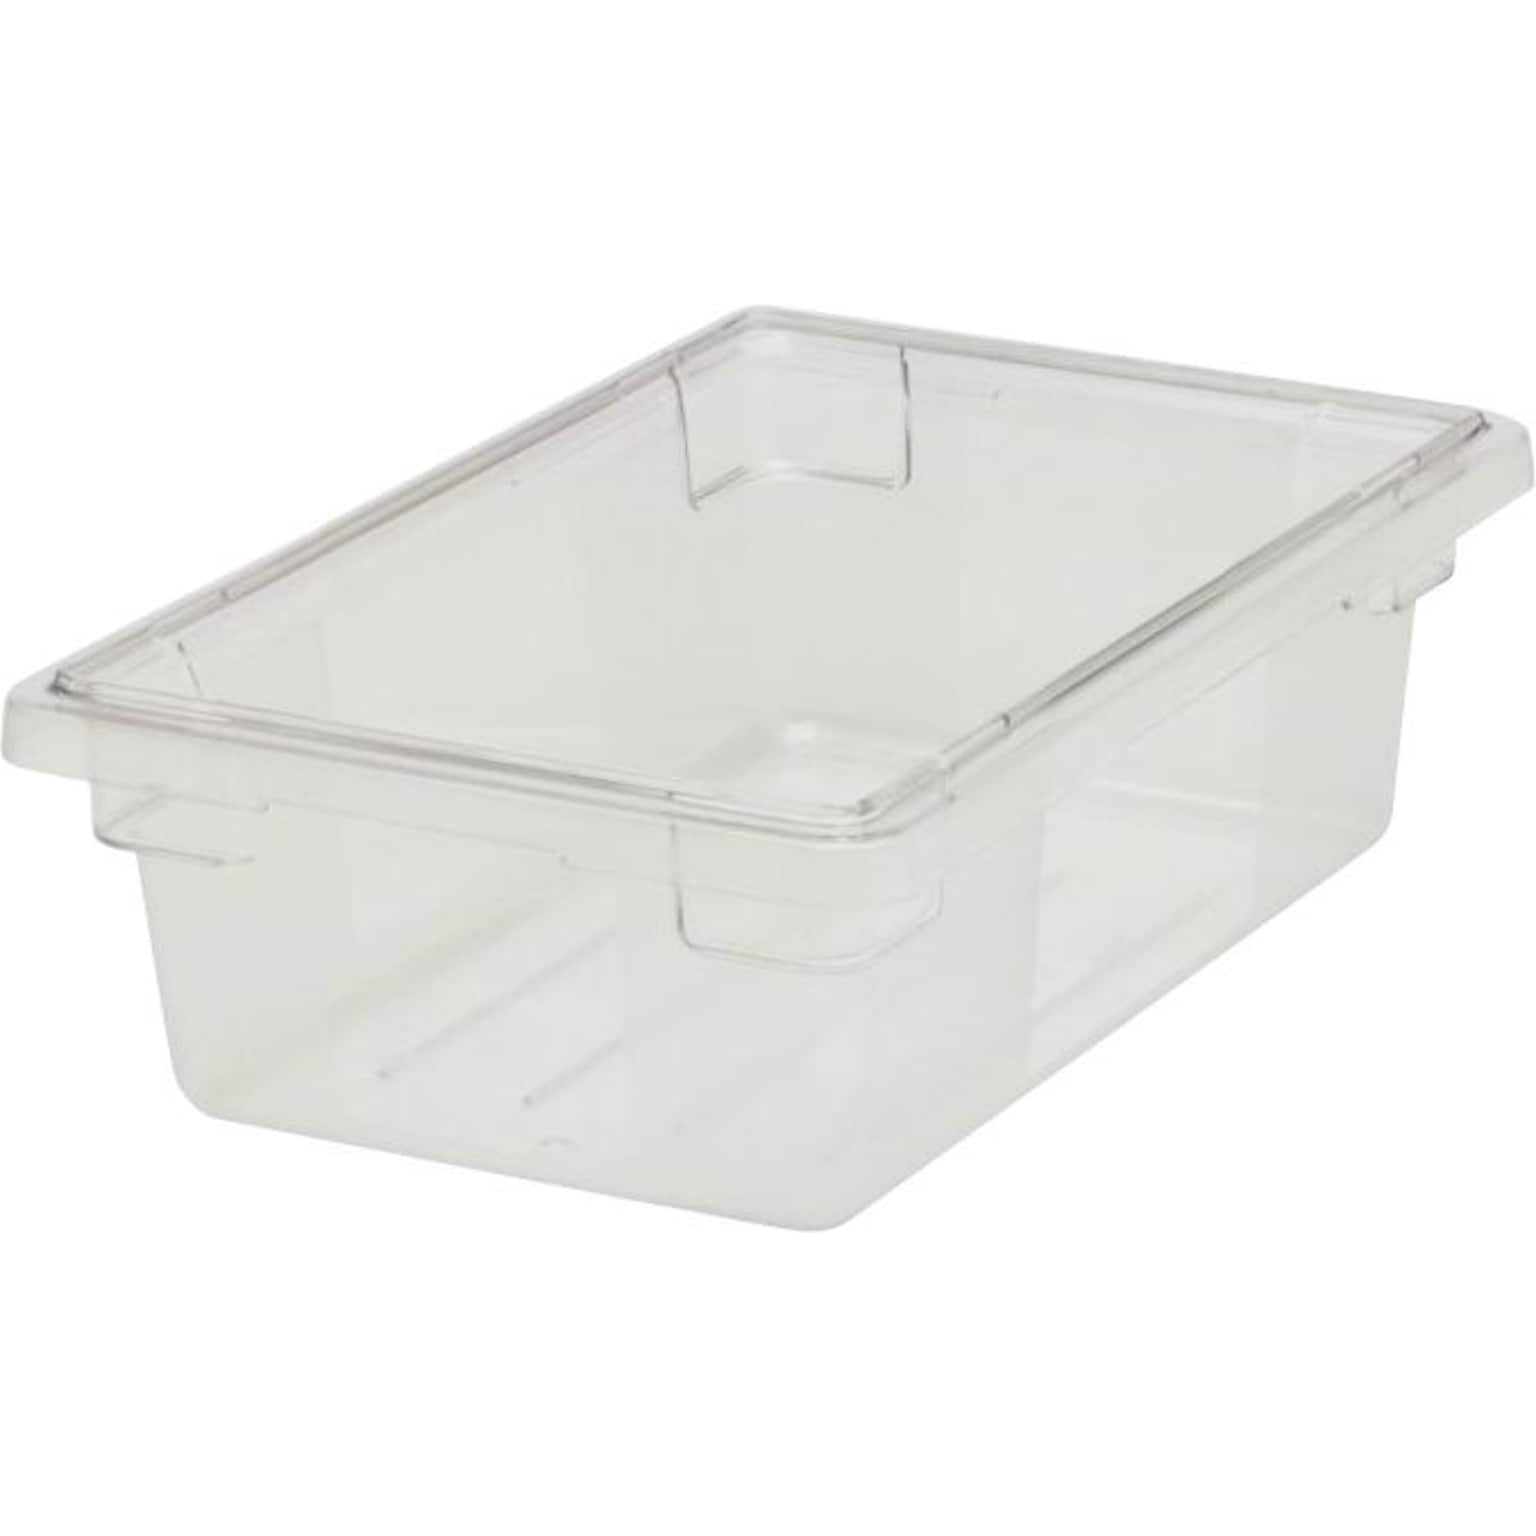 Rubbermaid Food Storage Container, 12-1/2 Gallon, 9 High, Clear